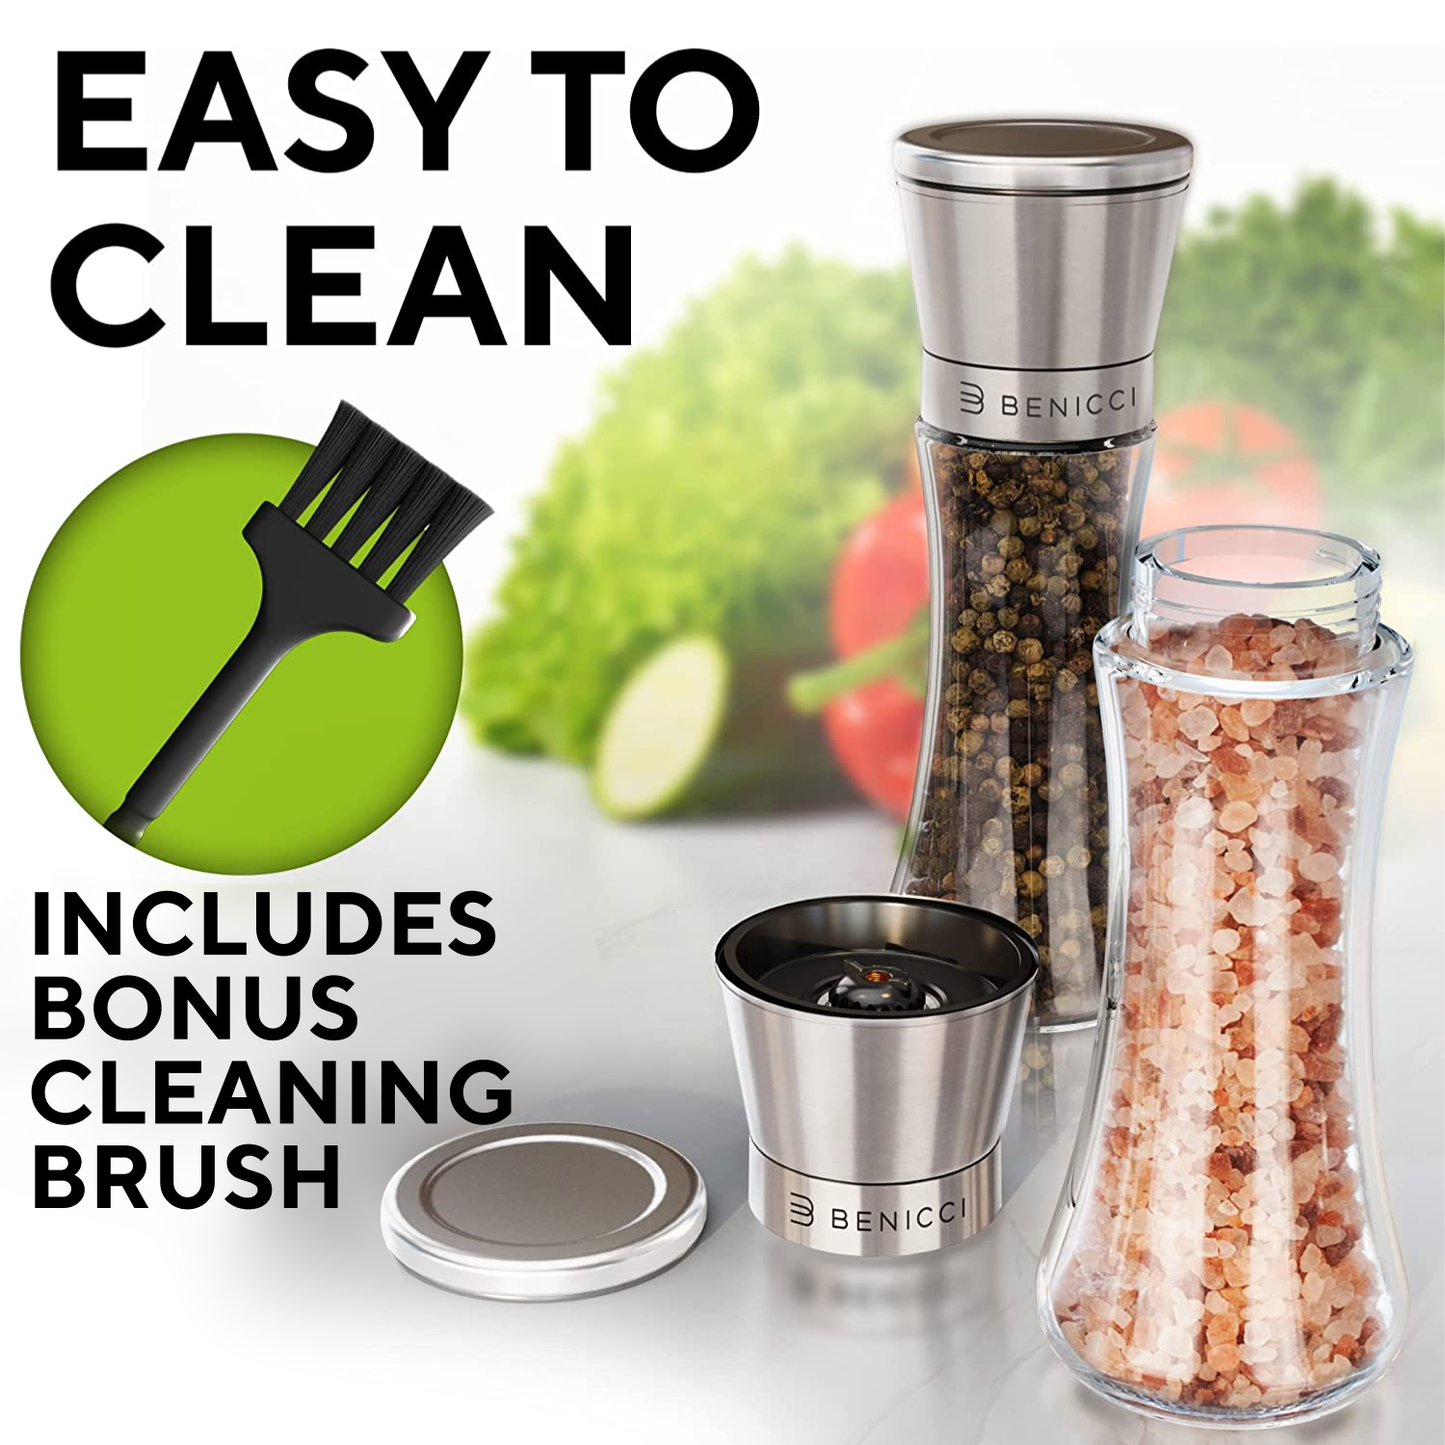 Beautiful Stainless Steel Salt & Pepper Grinders Refillable Set - Two 7 oz Salt / Spice Shakers with Adjustable Coarse Mills - Easy Clean Ceramic Grinders with BONUS Silicone Funnel and Cleaning Brush